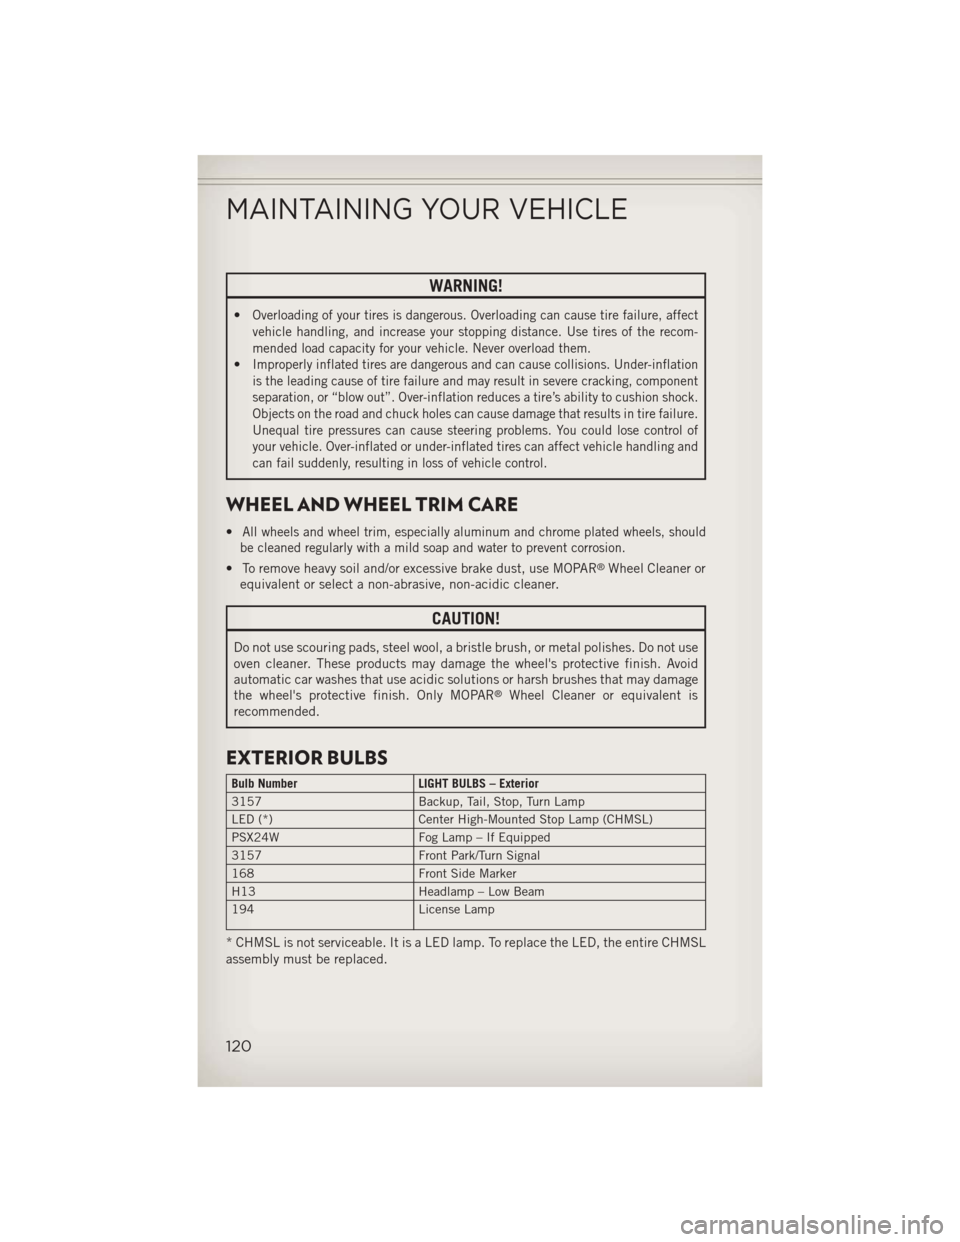 JEEP WRANGLER 2013 JK / 3.G User Guide WARNING!
•Overloading of your tires is dangerous. Overloading can cause tire failure, affect
vehicle handling, and increase your stopping distance. Use tires of the recom-
mended load capacity for y